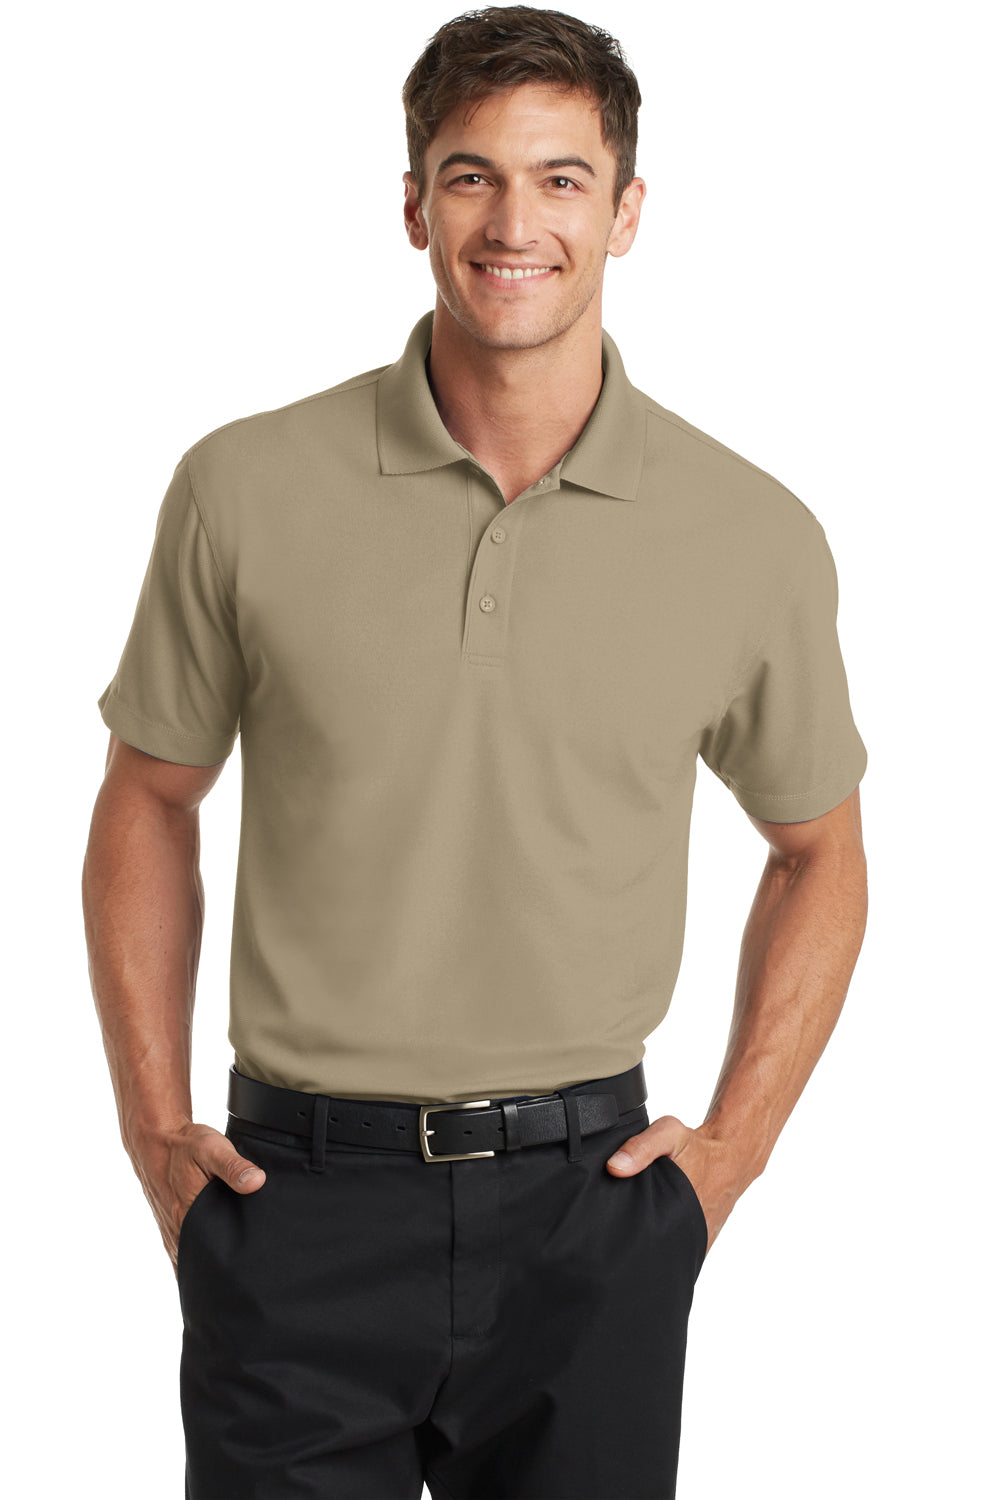 Port Authority K572 Mens Dry Zone Moisture Wicking Short Sleeve Polo Shirt Tan Brown Front